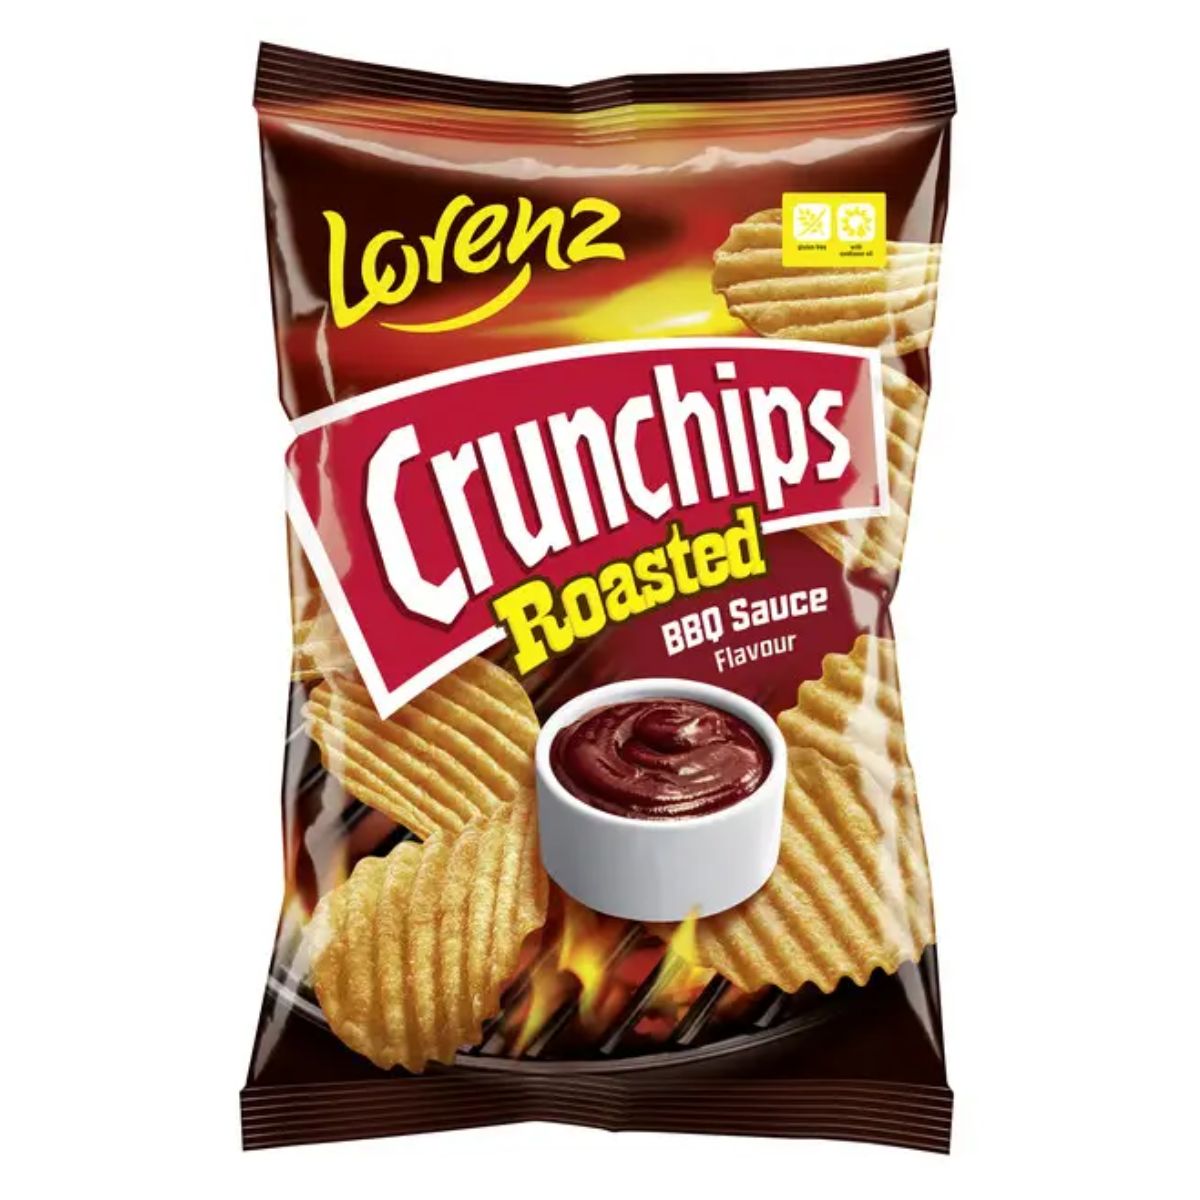 A bag of Lorenz - Crunchchips BBQ - 120g, featuring an image of the chips and a bowl of sauce.